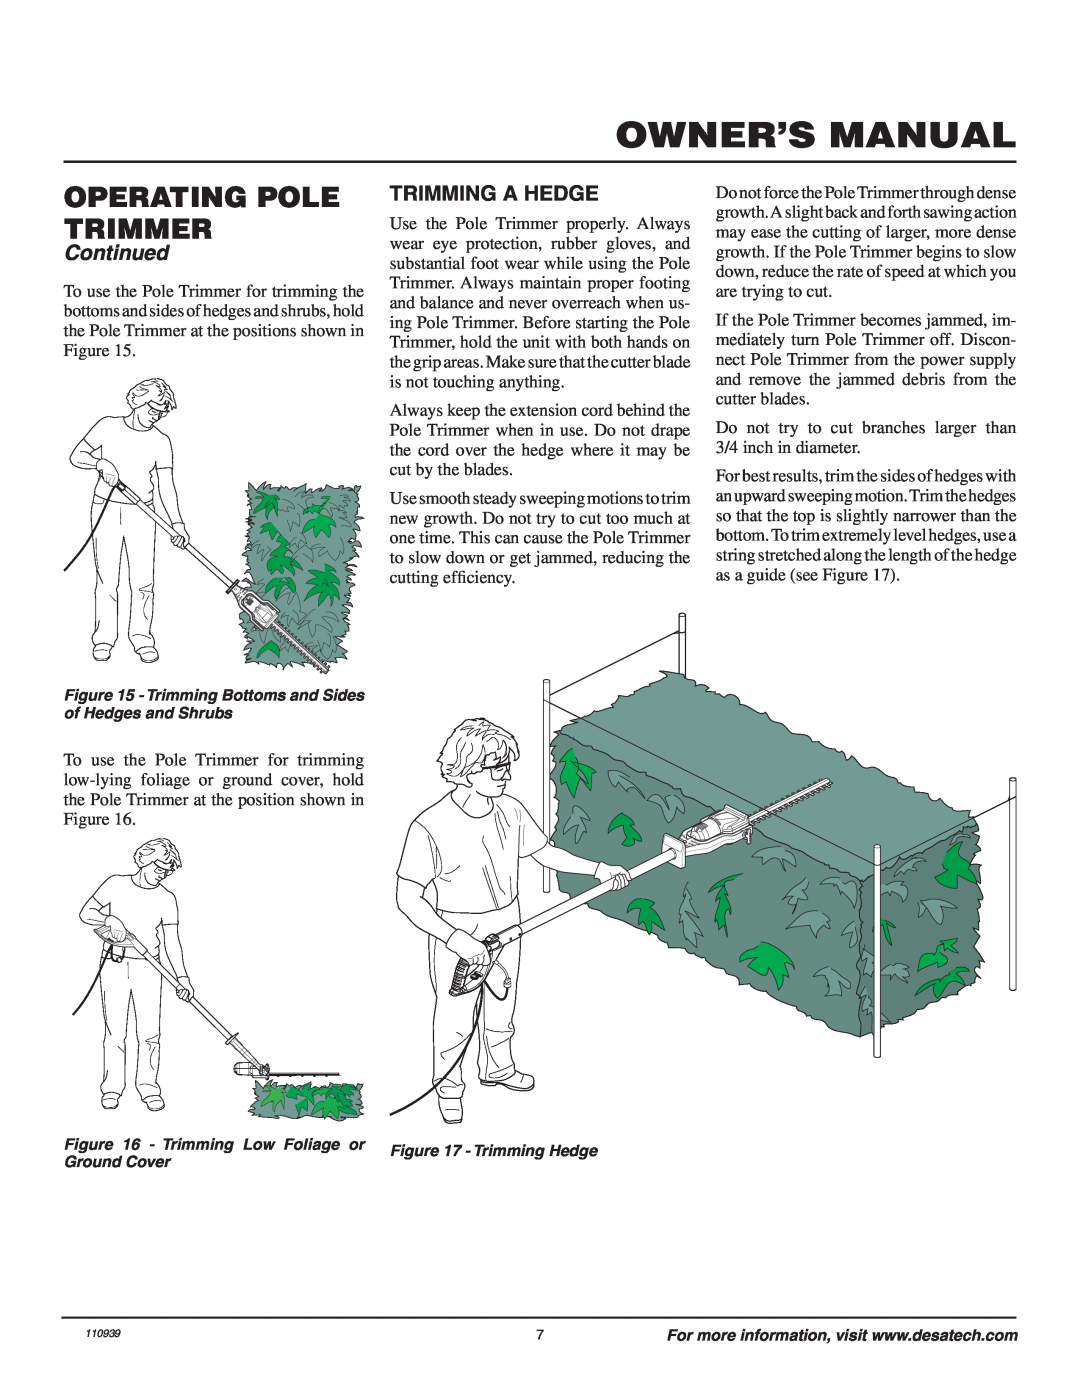 Desa 110946-01A owner manual Trimming A Hedge, Operating Pole Trimmer, Continued 